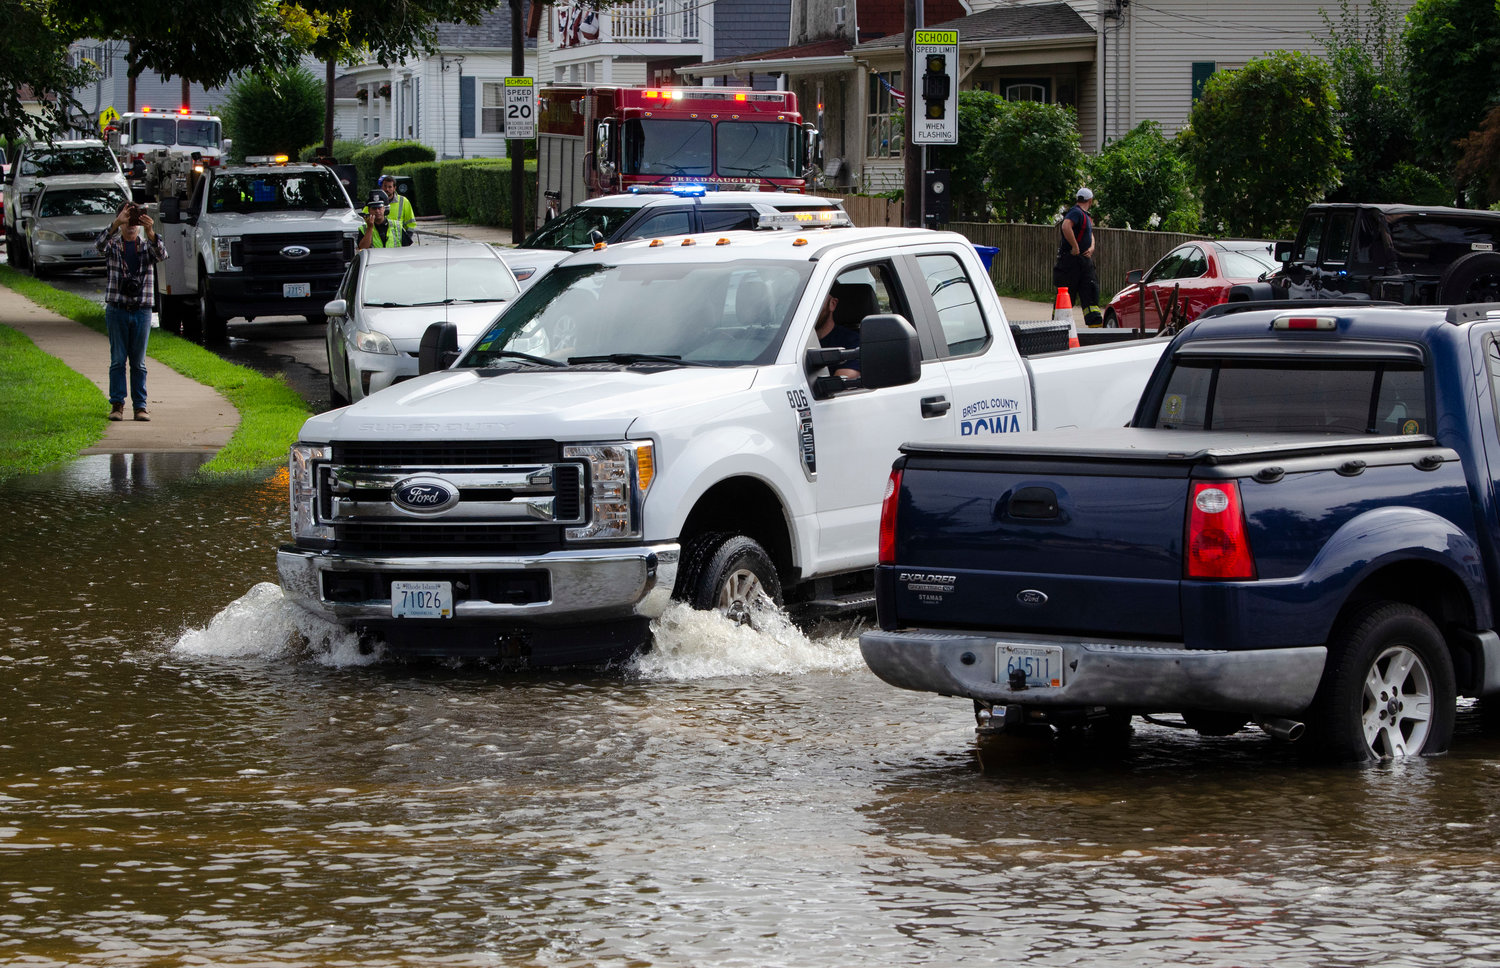 A BCWA employee powers a pick up truck through flooded Washington and Hope Streets on Thursday morning.